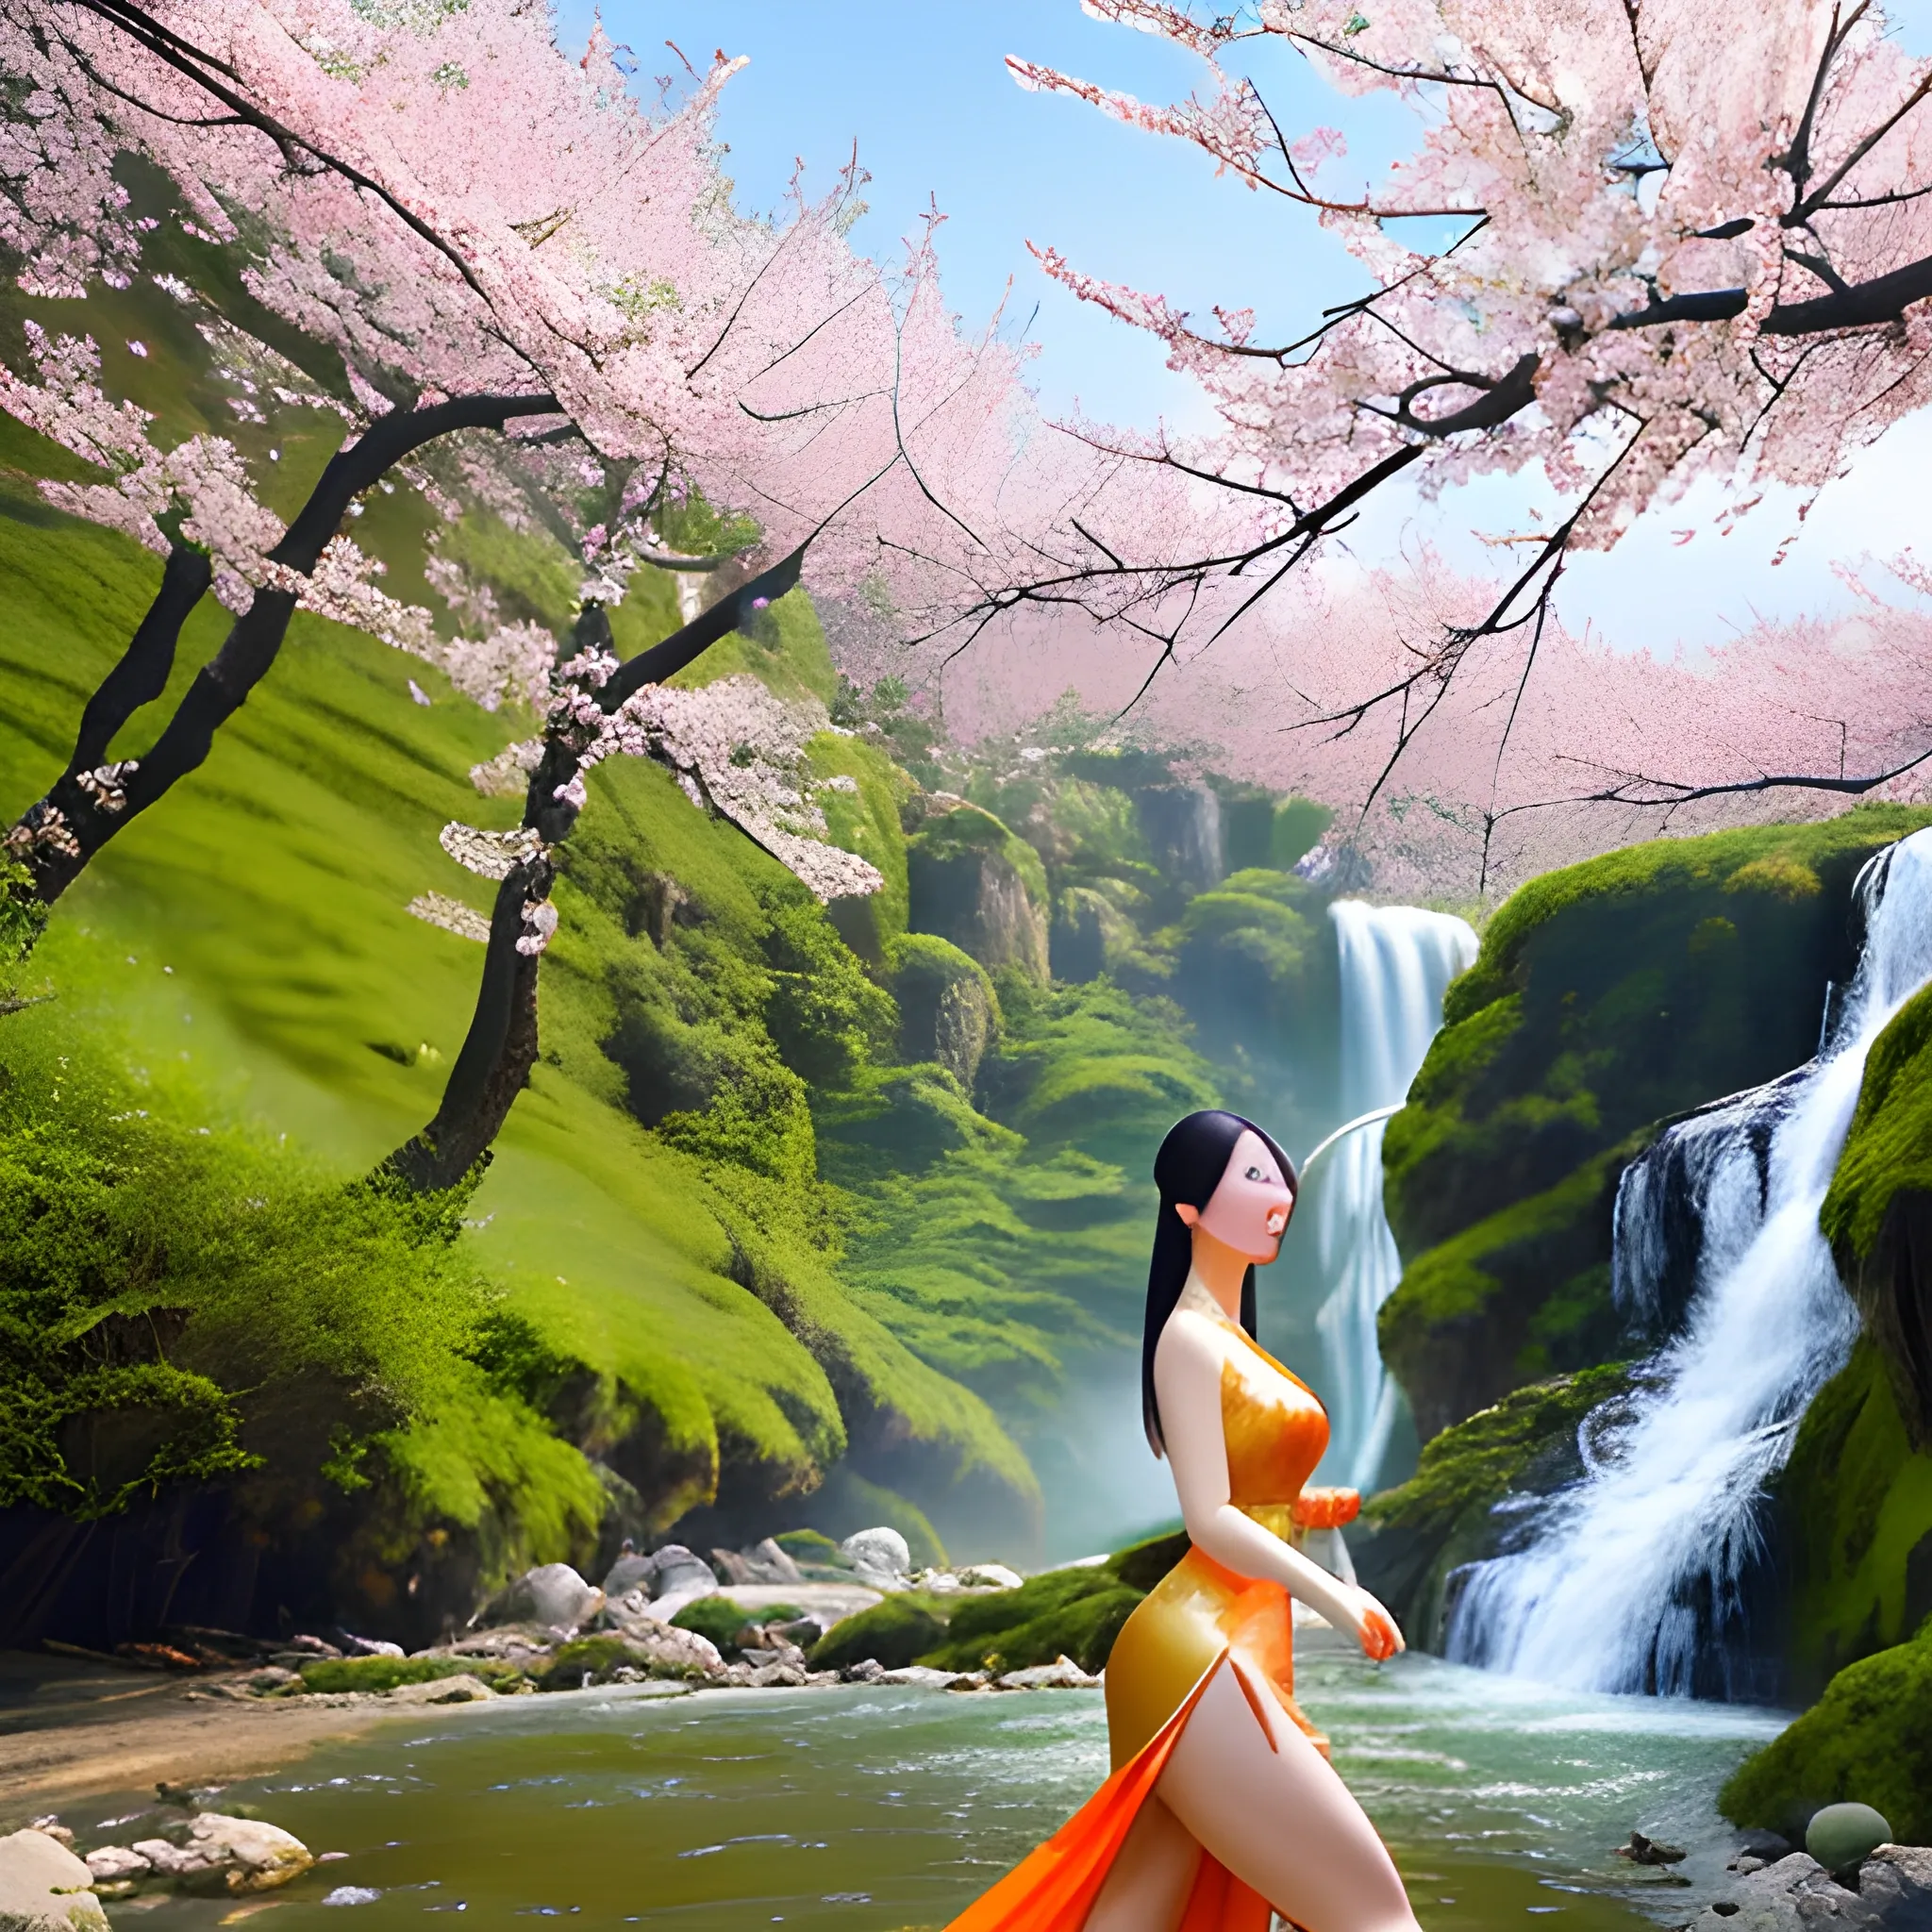 High quality, chinese young girl with beautiful body in tang costume walking by a stream with beautiful peach blossoms and trees in the background and a beautiful waterfall, 8K